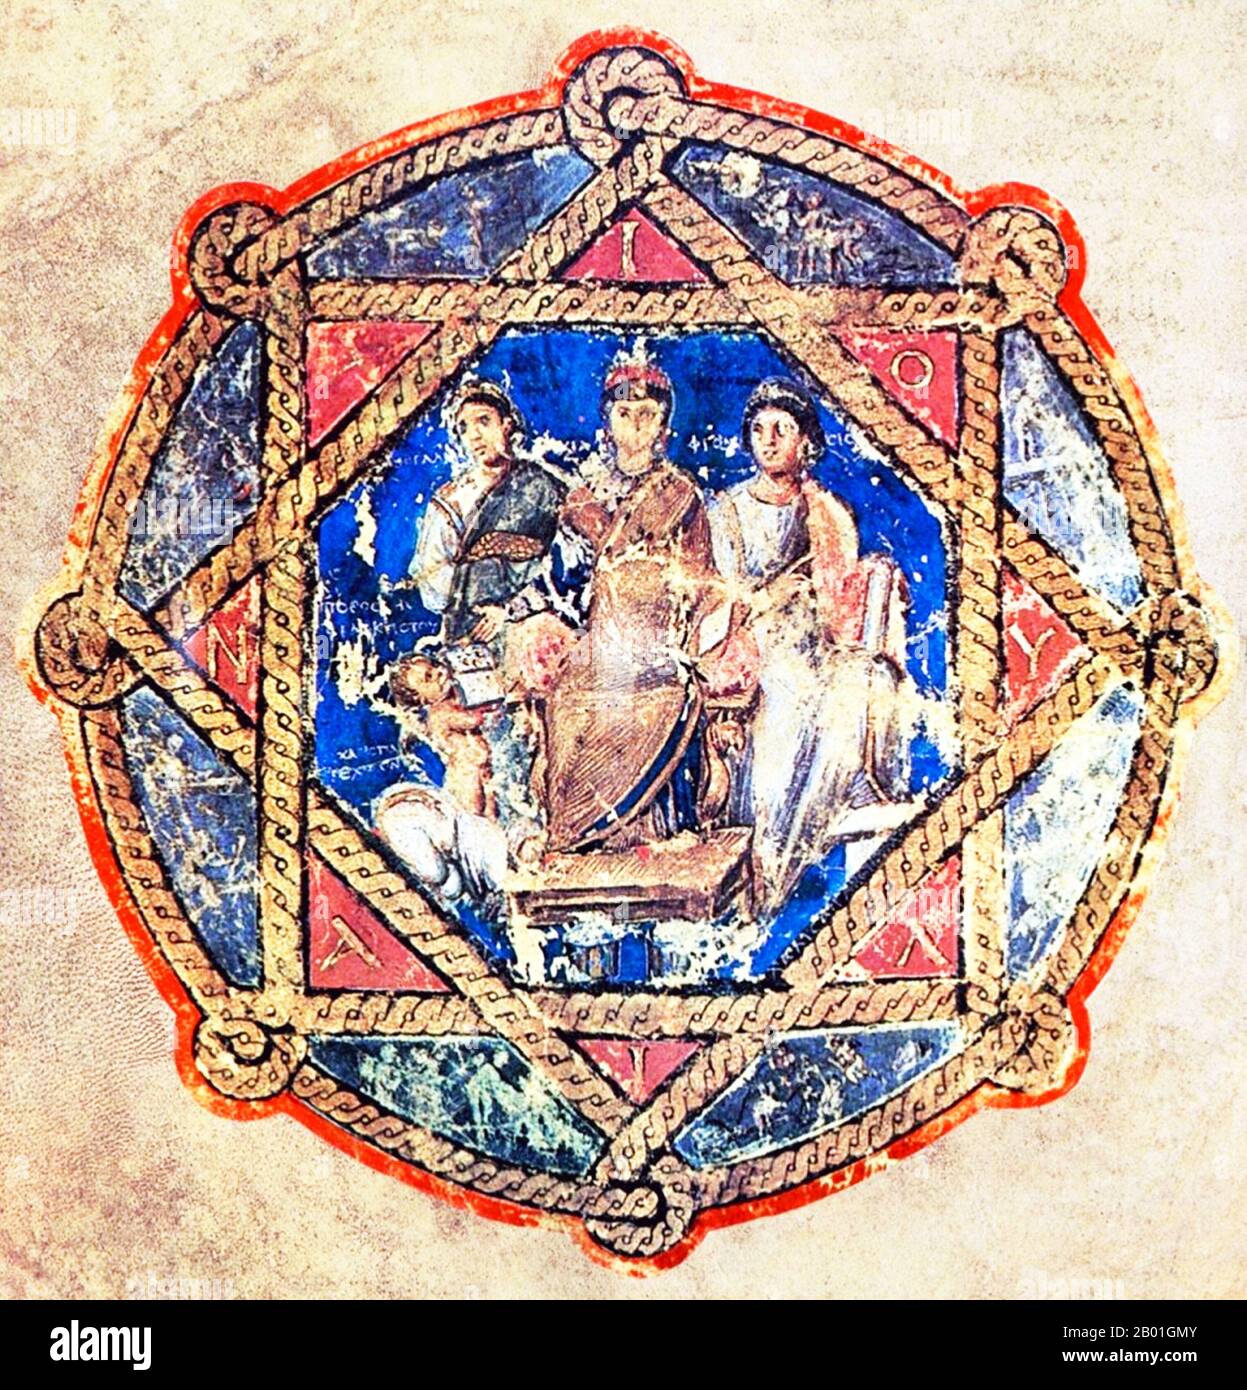 Greece/ Byzantium/Turkey: A donor portrait from the Codex Vienna Dioscorides, 512 CE.  A dedication to Juliana Anikias in the Vienna Dioscorides (fol sixth verso). The enthroned princess is flanked by allegorical figures of generosity and wisdom.  The Vienna Dioscurides or Vienna Dioscorides is an early 6th century illuminated manuscript of De Materia Medica by Dioscorides in Greek. It is an important and rare example of a late antique scientific text. The 491 vellum folios measure 37 by 30 cm and contain more than 400 pictures of animals and plants, most done in a naturalistic style. Stock Photo